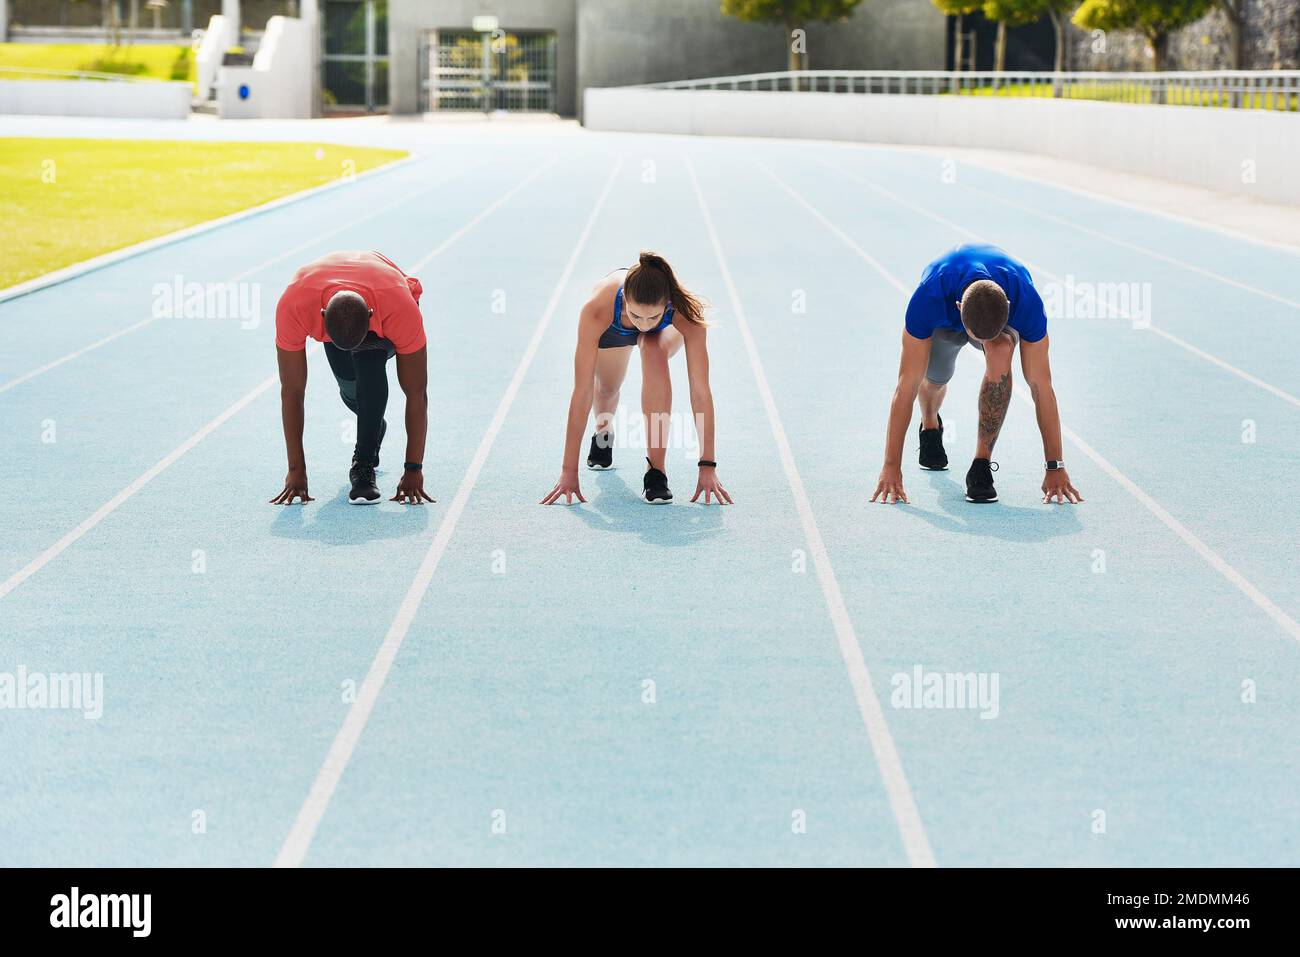 Ready for a race. Full length shot of three young athletes in the set position out on the running track. Stock Photo